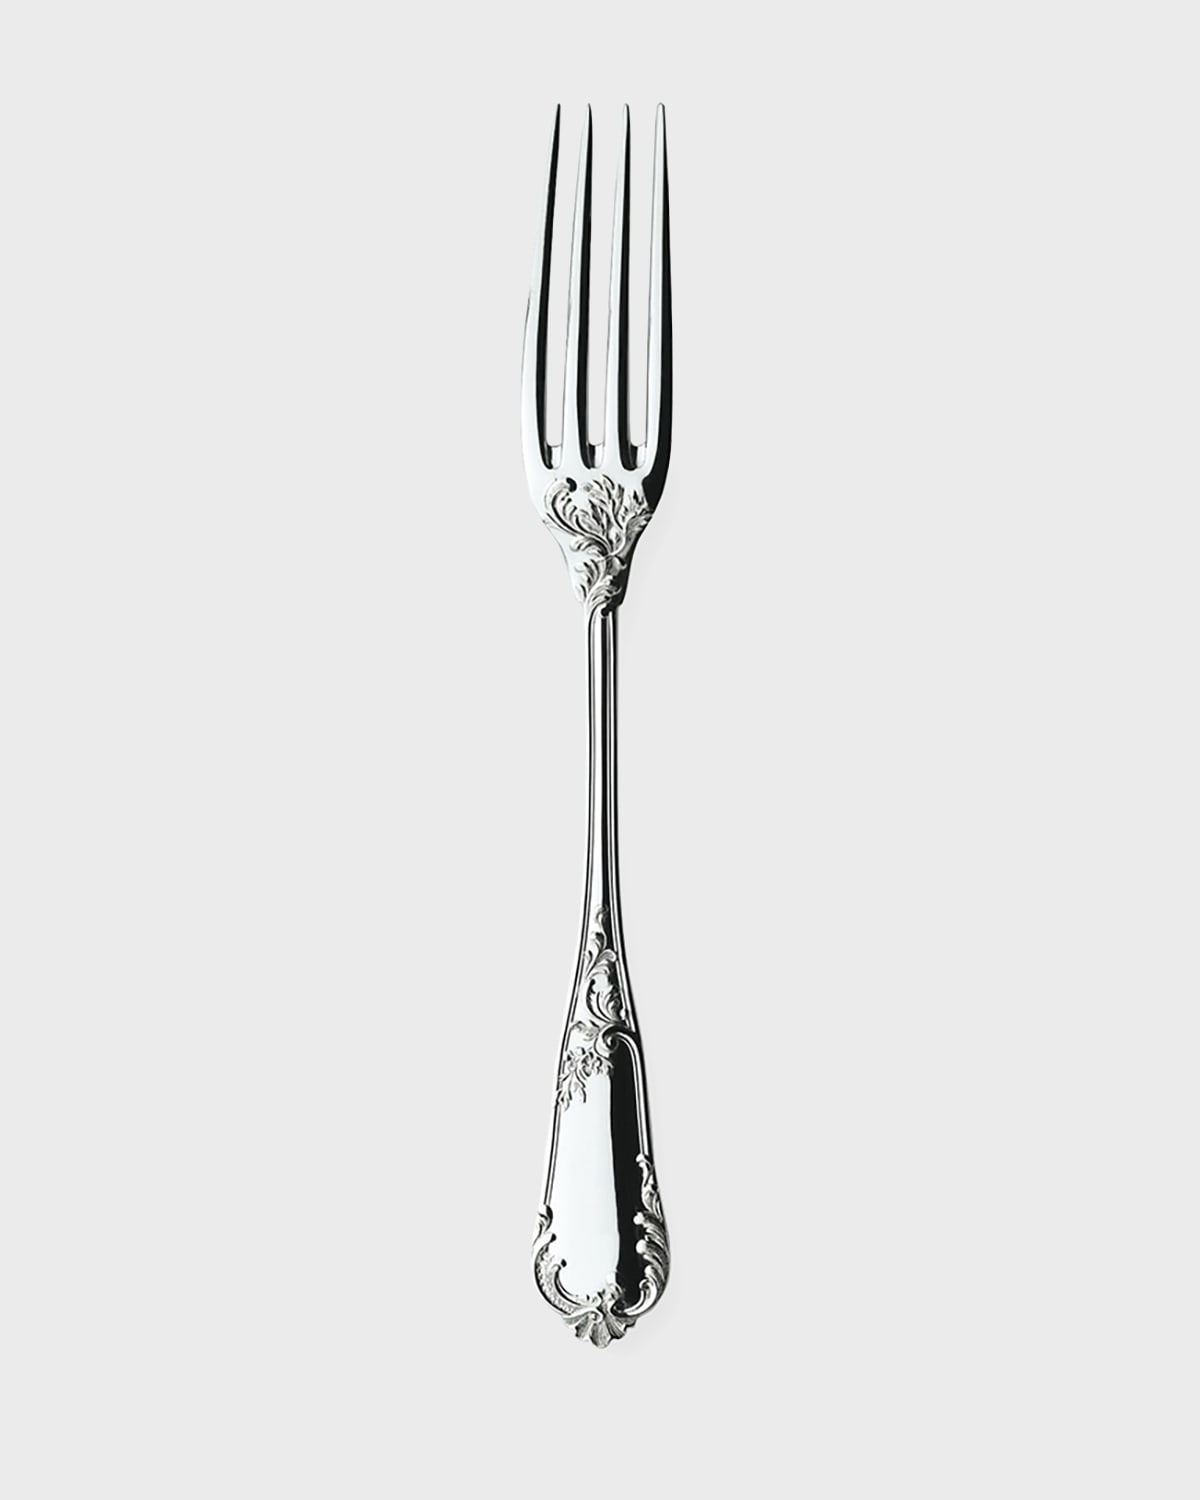 Shop Ercuis Rocaille Sterling Silver Dinner Fork